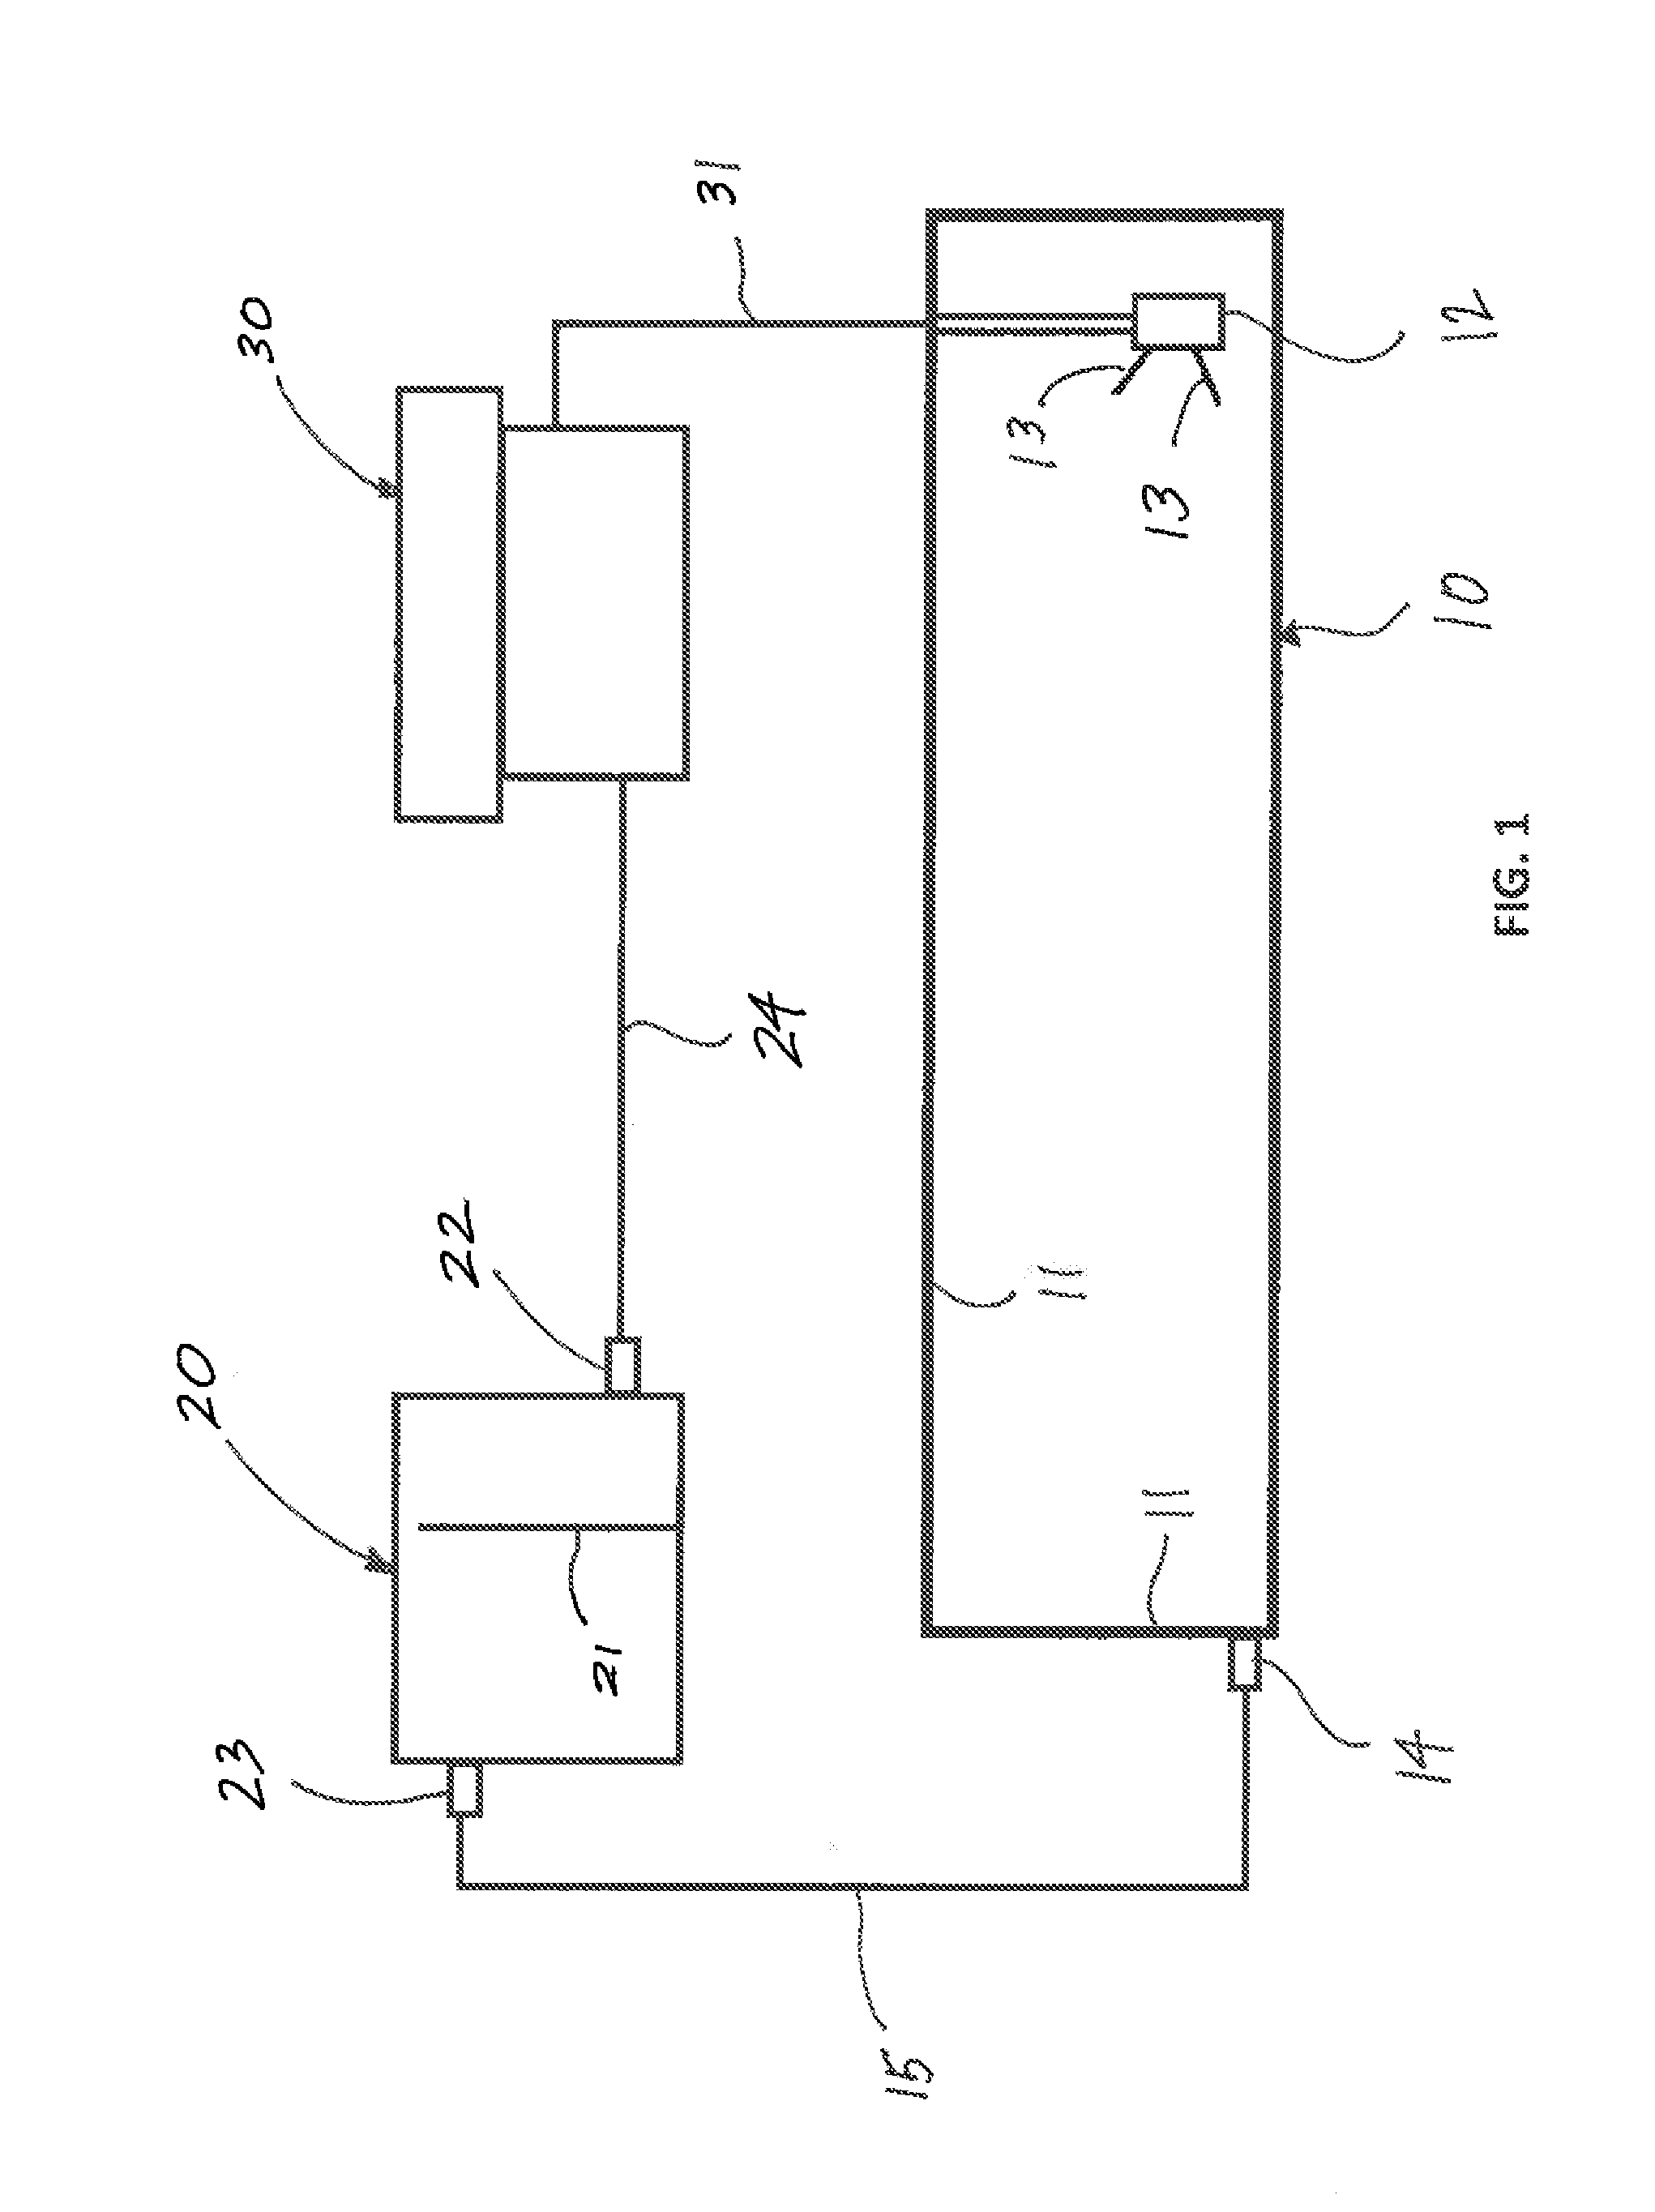 Method for automated, closed loop cleaning of tanks